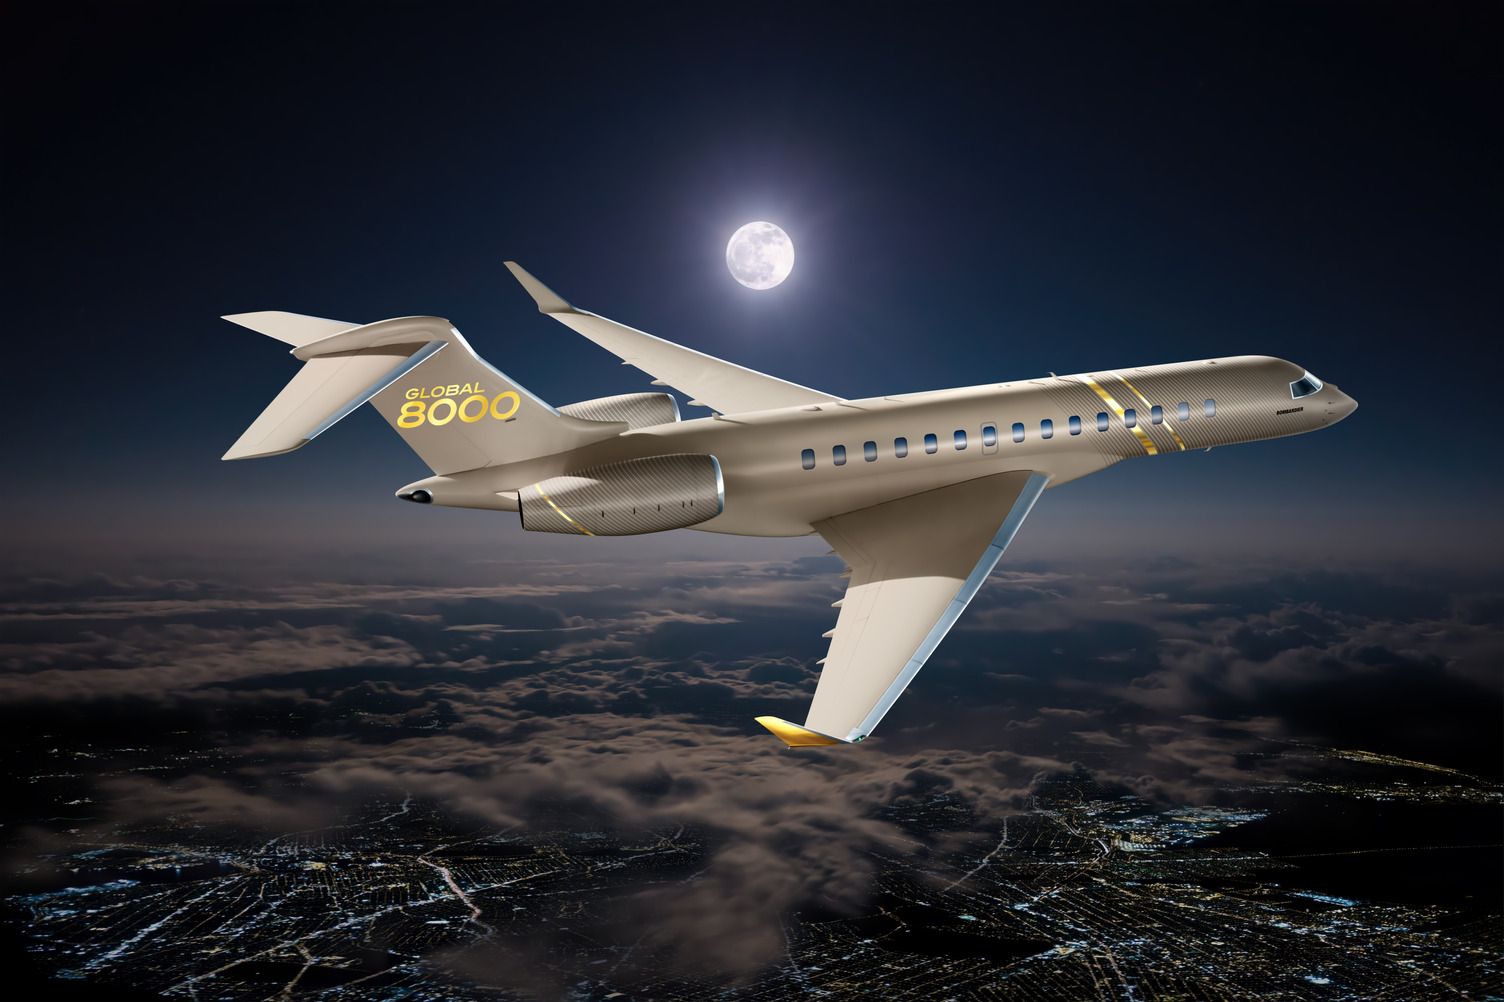 A Bombardier Global 8000 in flight during night time.